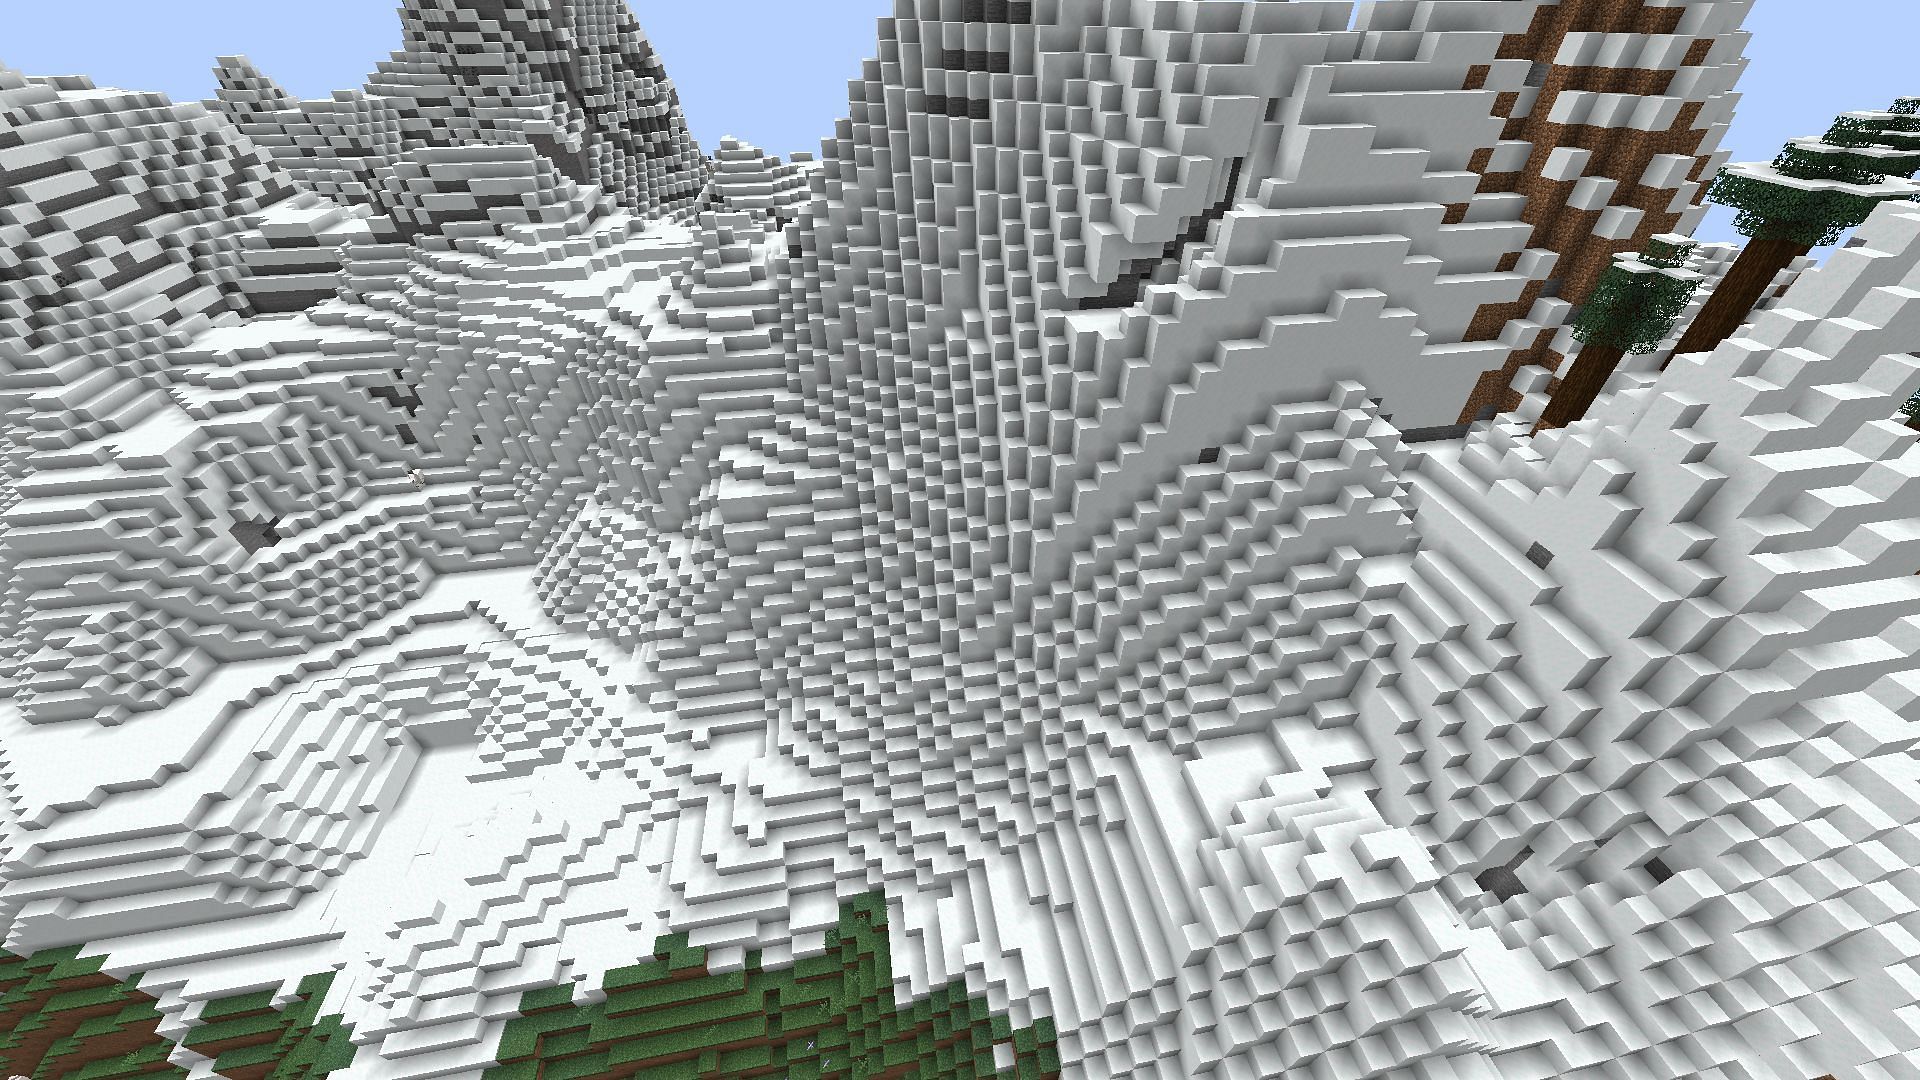 The snowy slopes biome in Minecraft 1.18 update (Image via Minecraft Wiki)